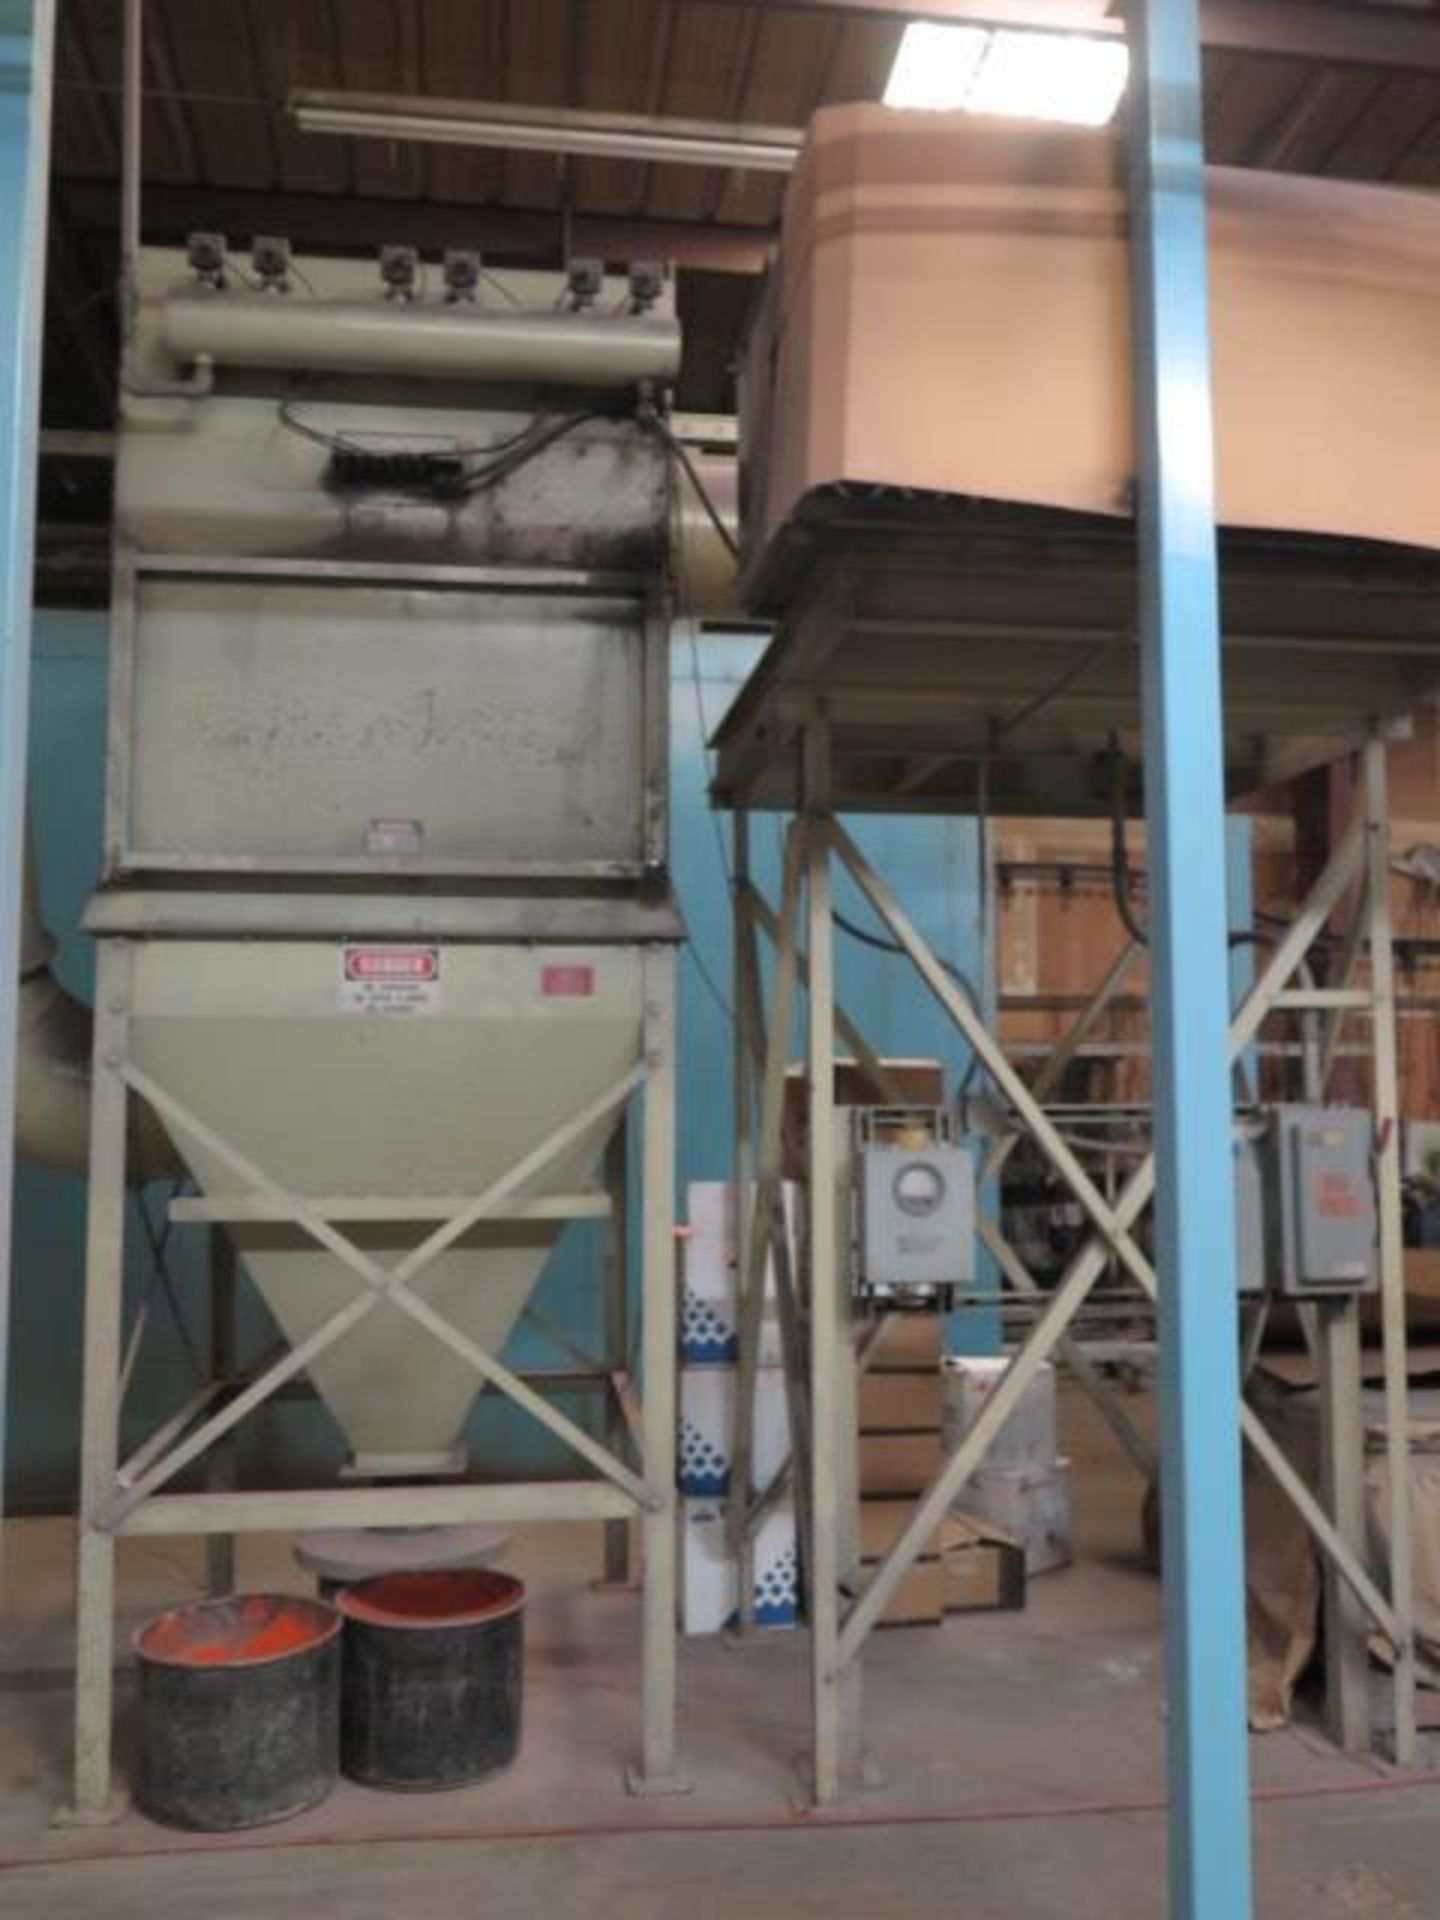 Gema Volstatic Powder Paint Spray Booth w/ Cyclone Style Dust Collection System, Pass Thru - Image 22 of 26